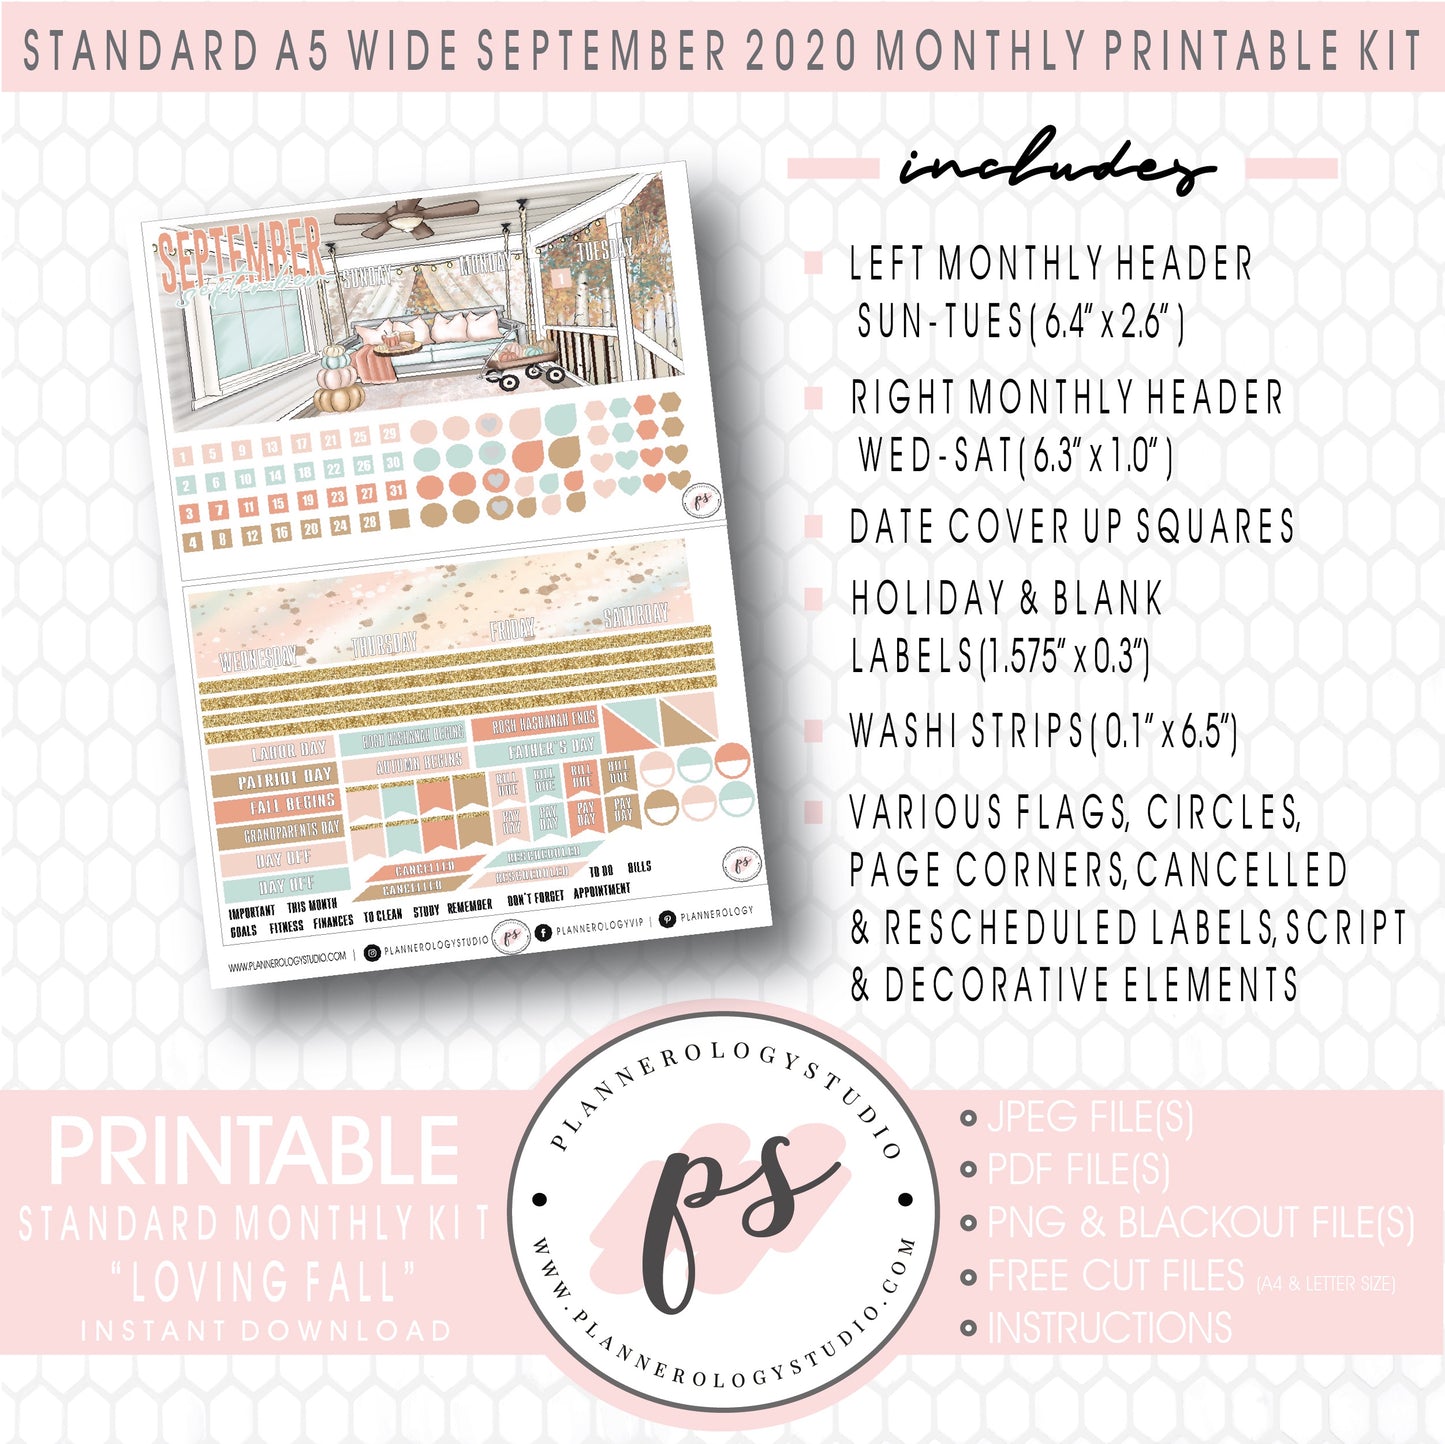 Loving Fall September 2020 Monthly Kit Digital Printable Planner Stickers (for use with Standard A5 Wide Planners)